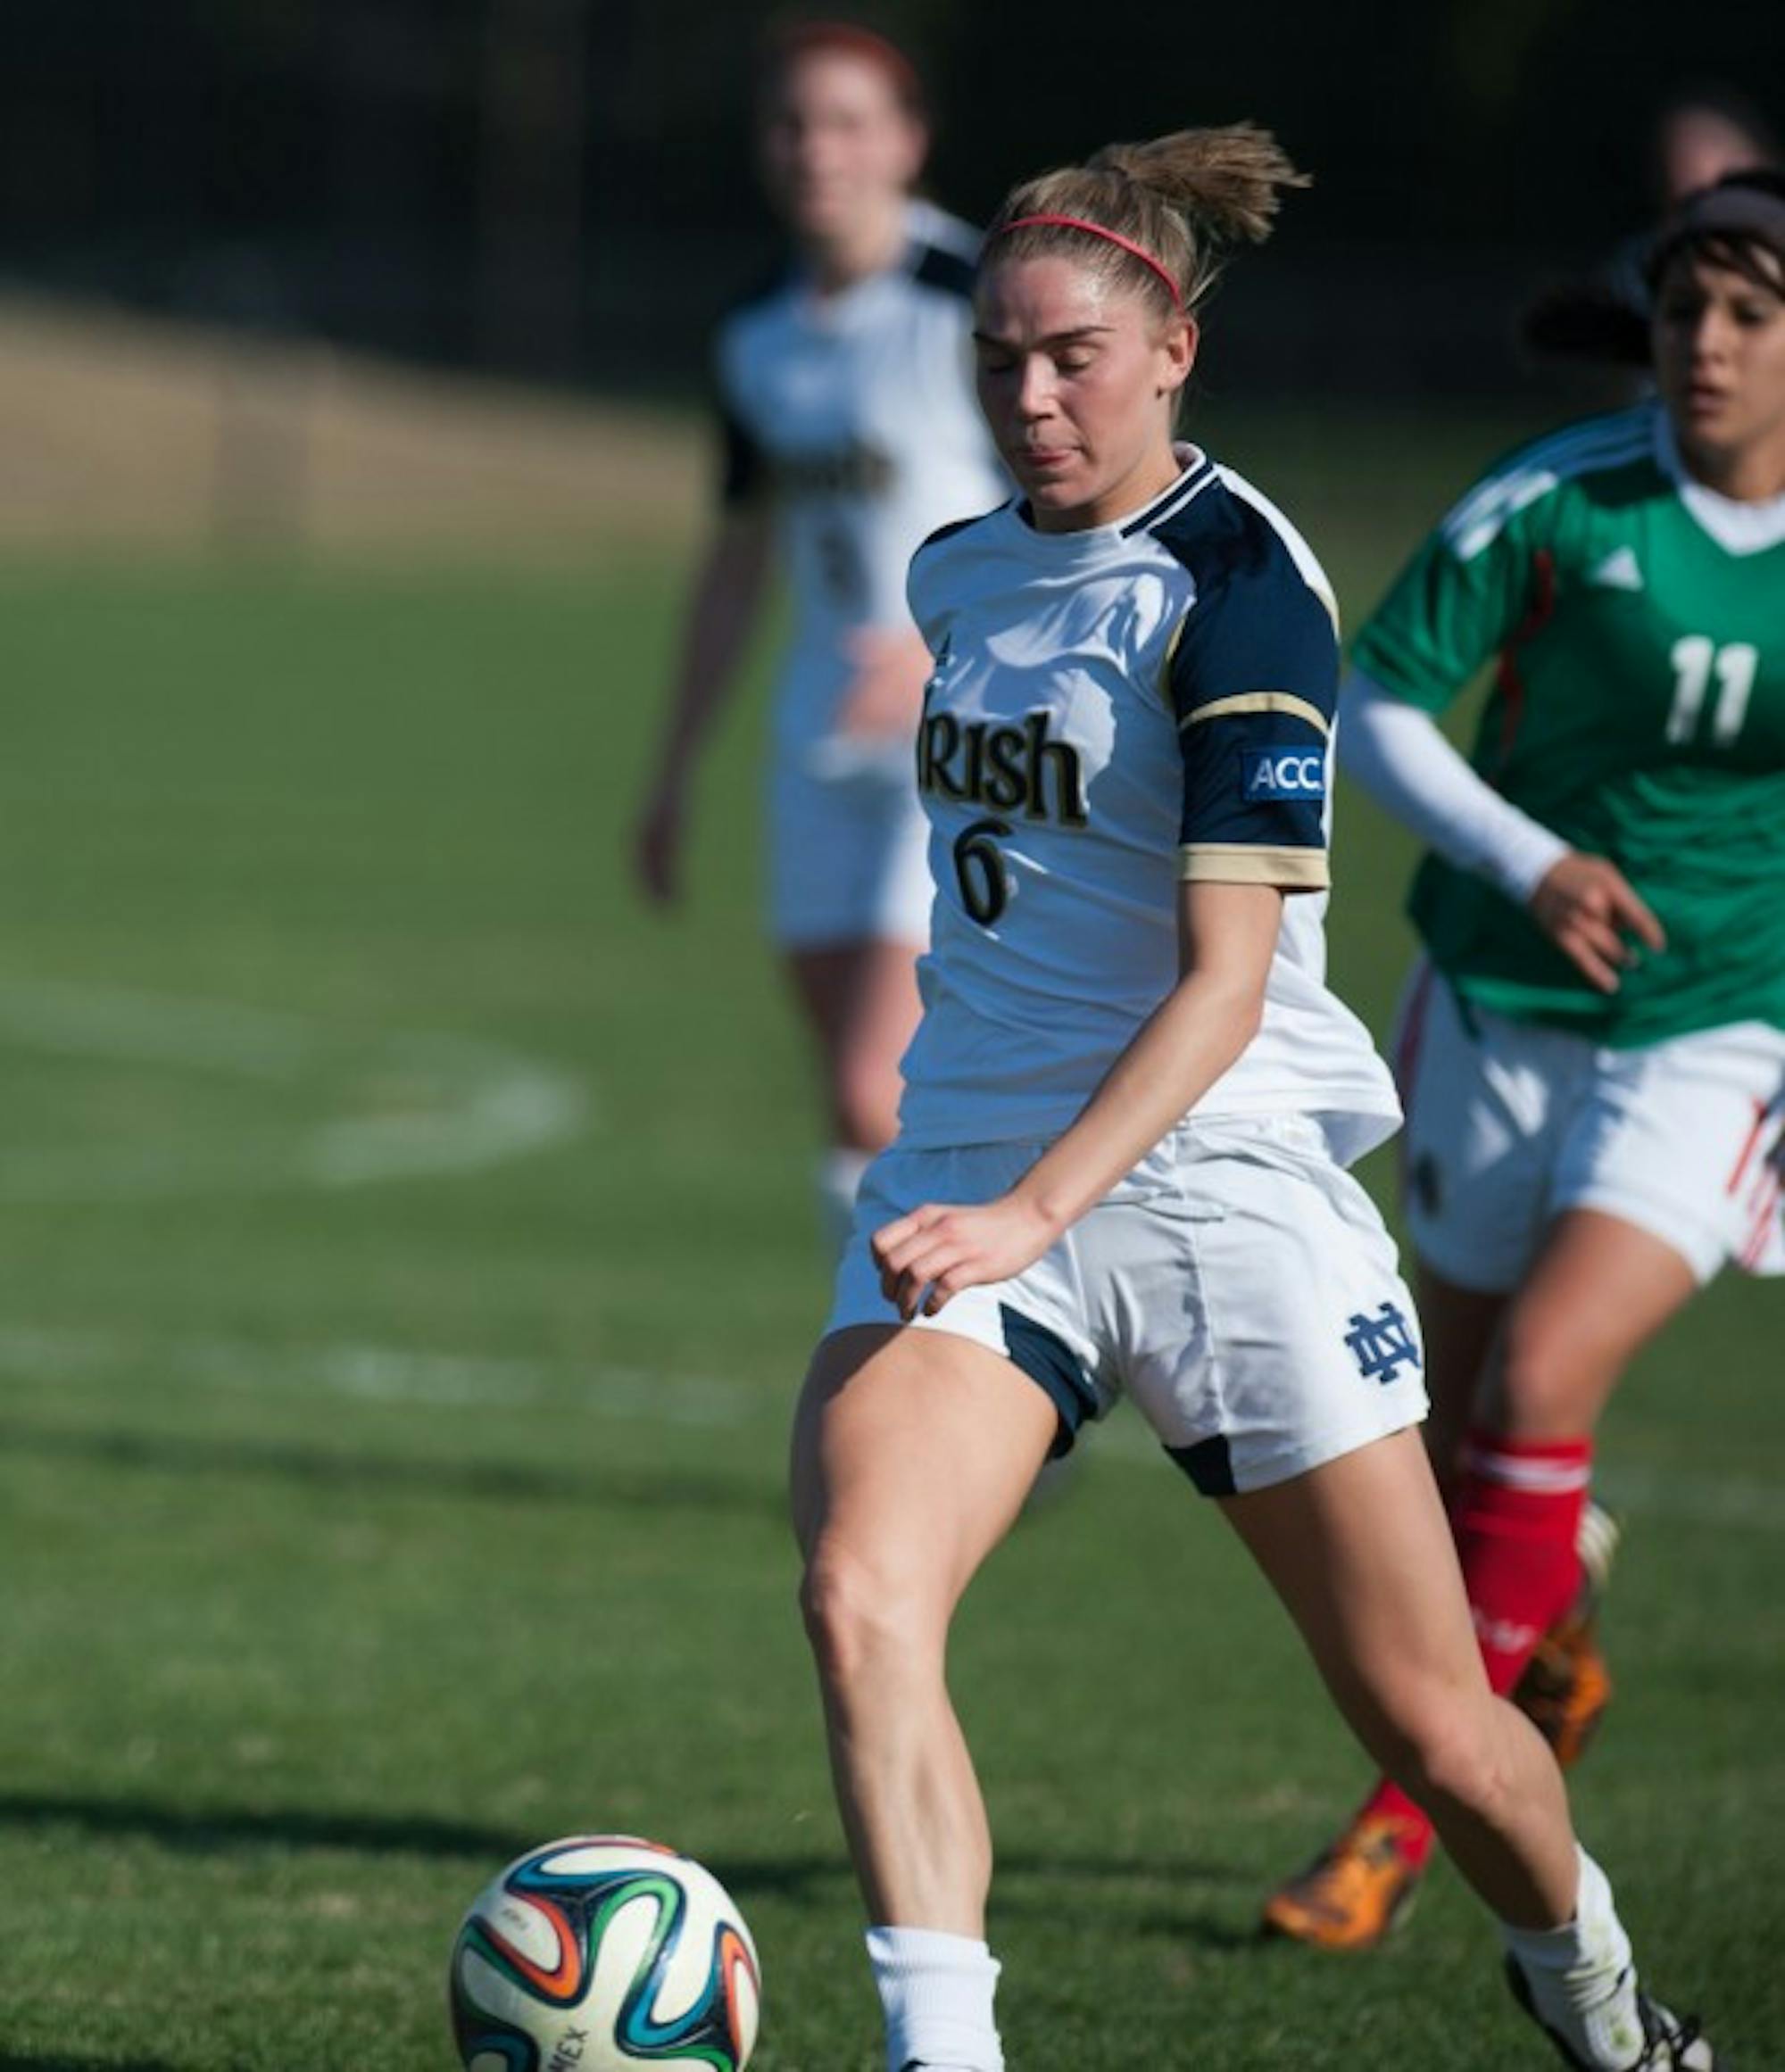 Irish junior Anna Maria Gilbertson takes a touch during a game against Mexico’s U-20 National Team on Apr. 25, 2014 at Alumni Stadium. Gilbertson has ten goals to her name during her Notre Dame career.